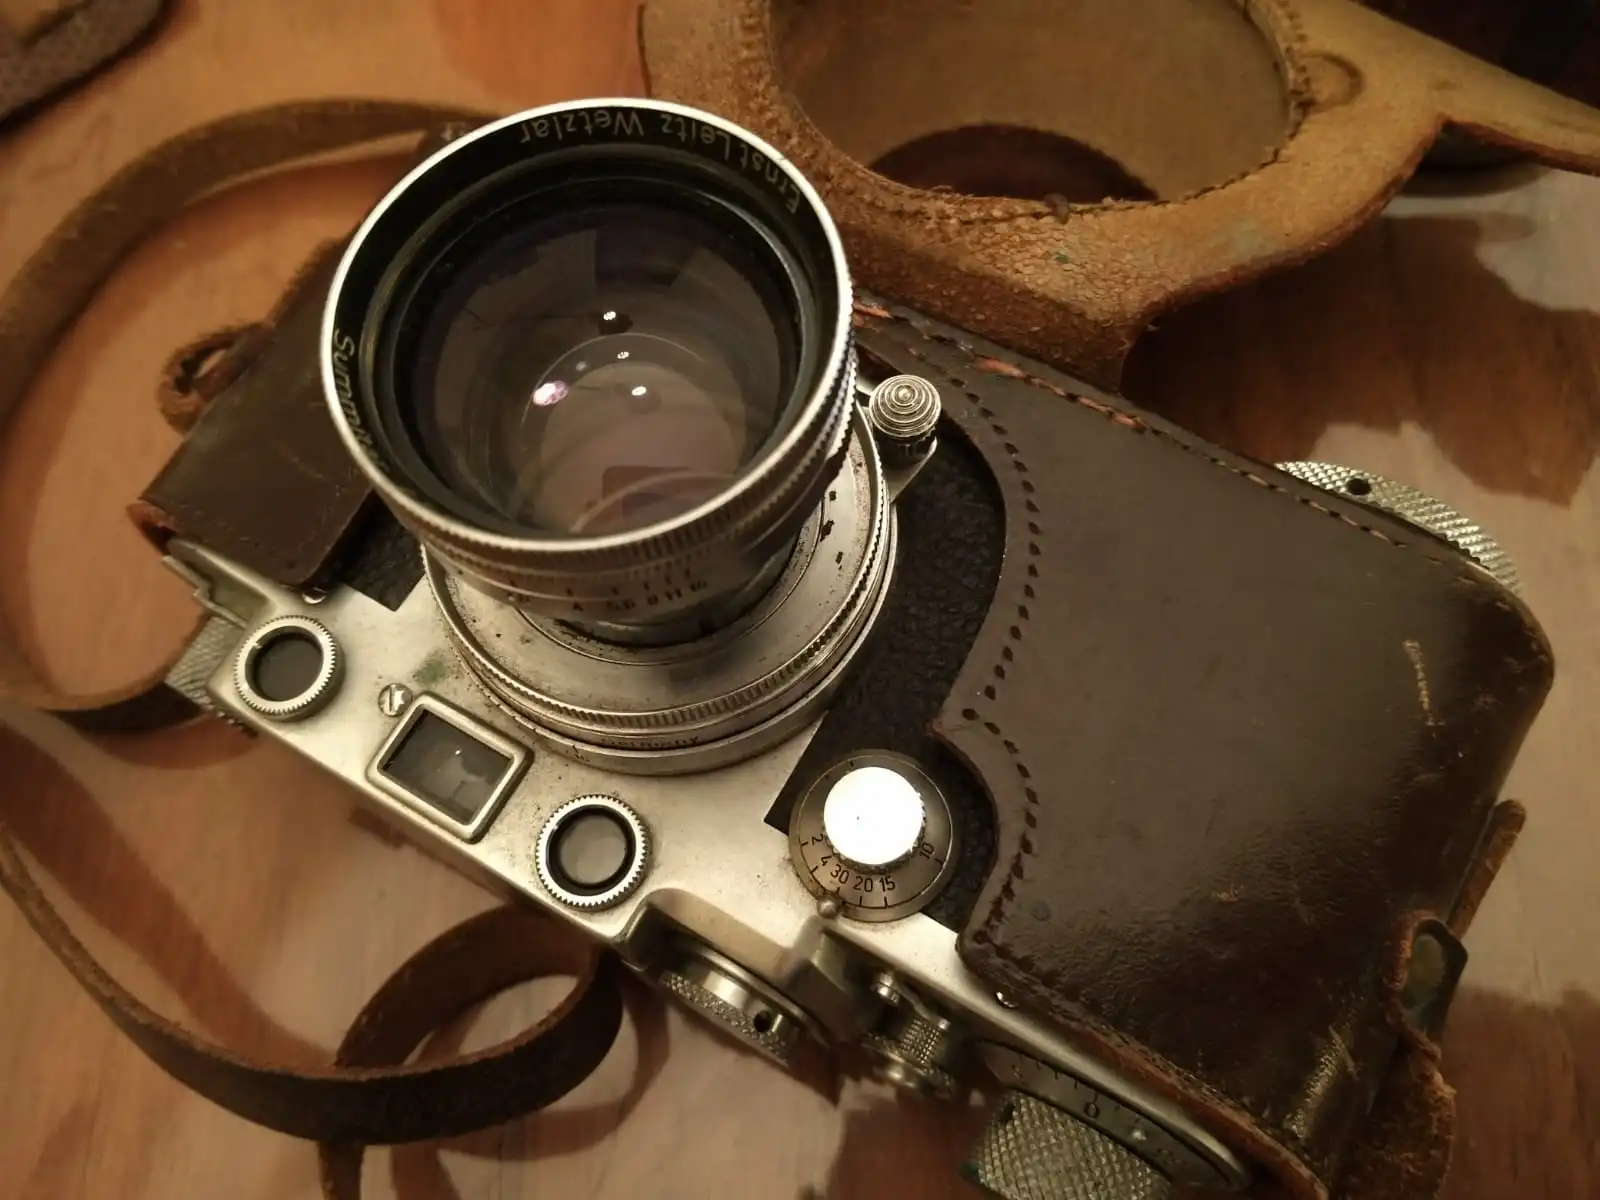 35mm Film and the Leica